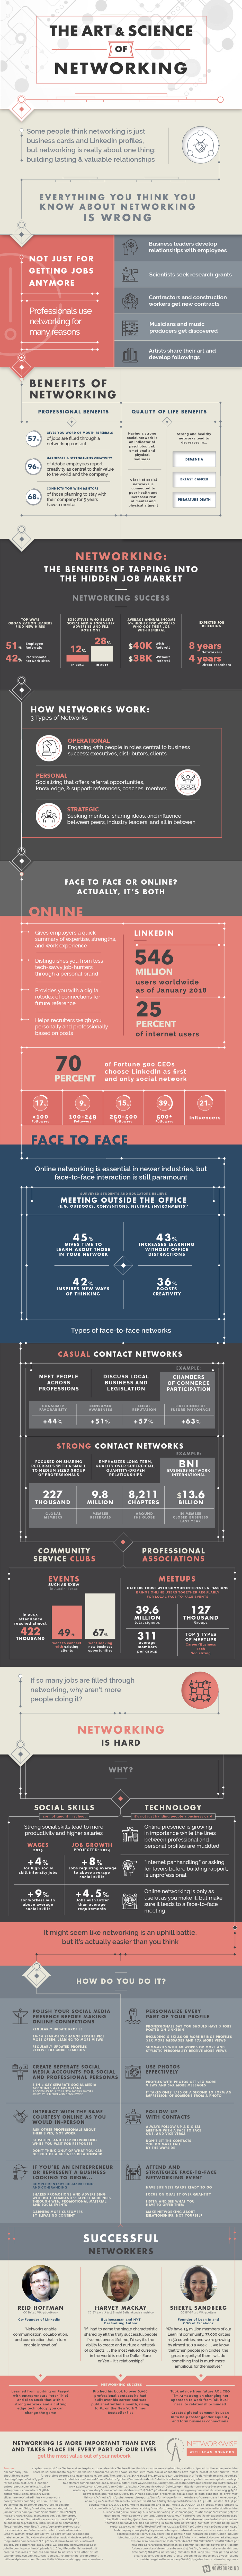 The Art and Science of Networking